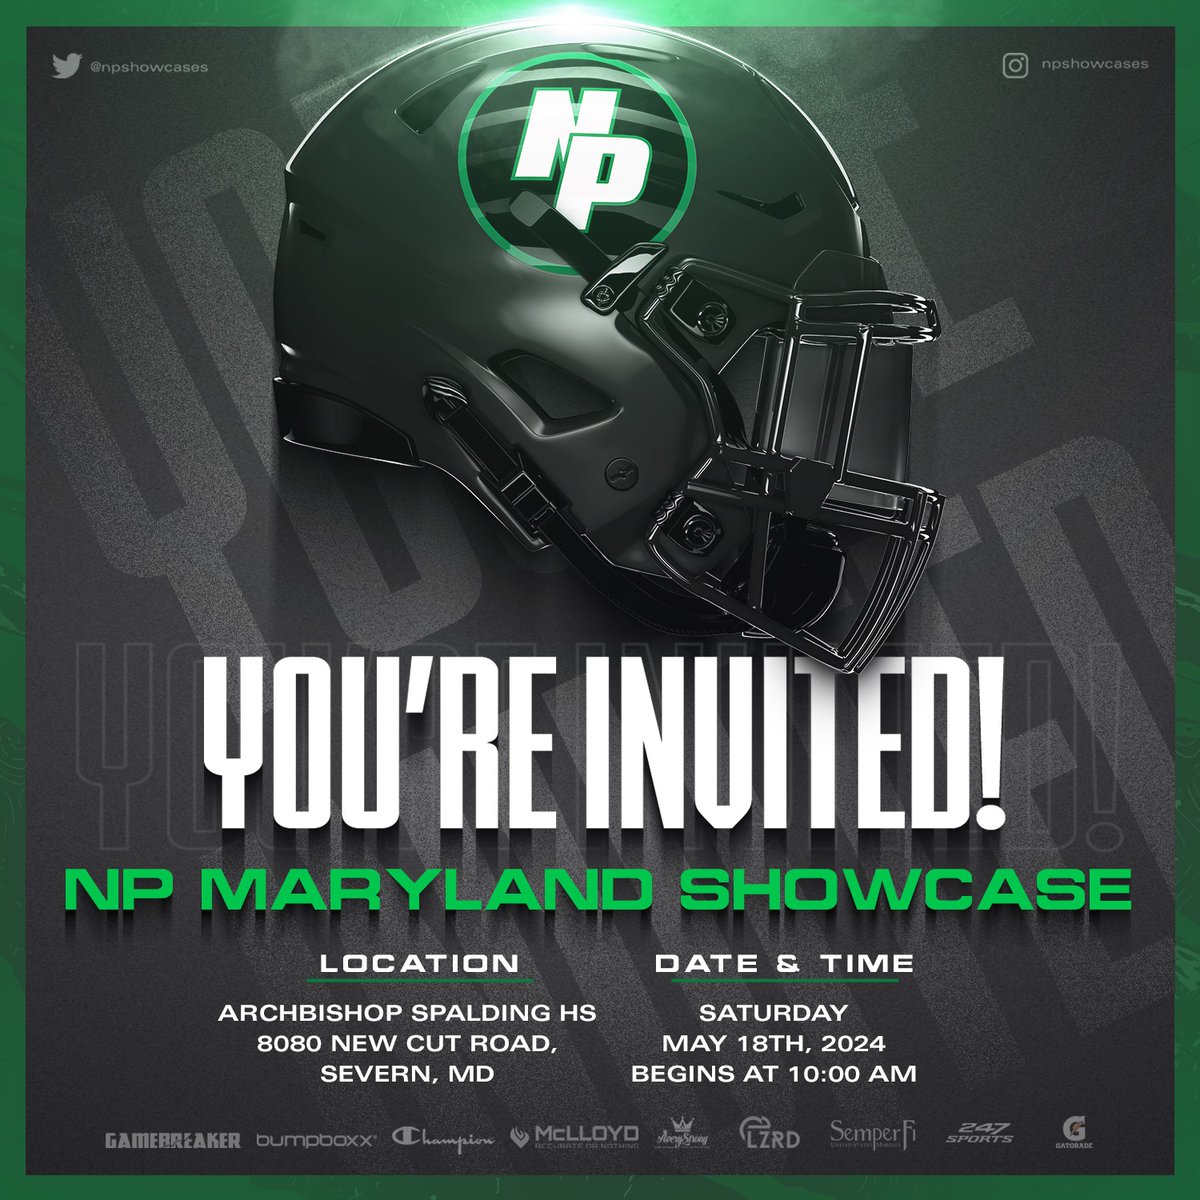 Reg closes 2mRow 4 the National Preps College Showcase. All positions R #SoldOut Xcept DB, QB and RB. The Premier College Showcase in the Mid Atlantic Region 4 #15Years, we have averaged over 100+ FCS, D2 and D3 Coaches / 35+ College Programs over the 15 years. #WhyNP #Trusted